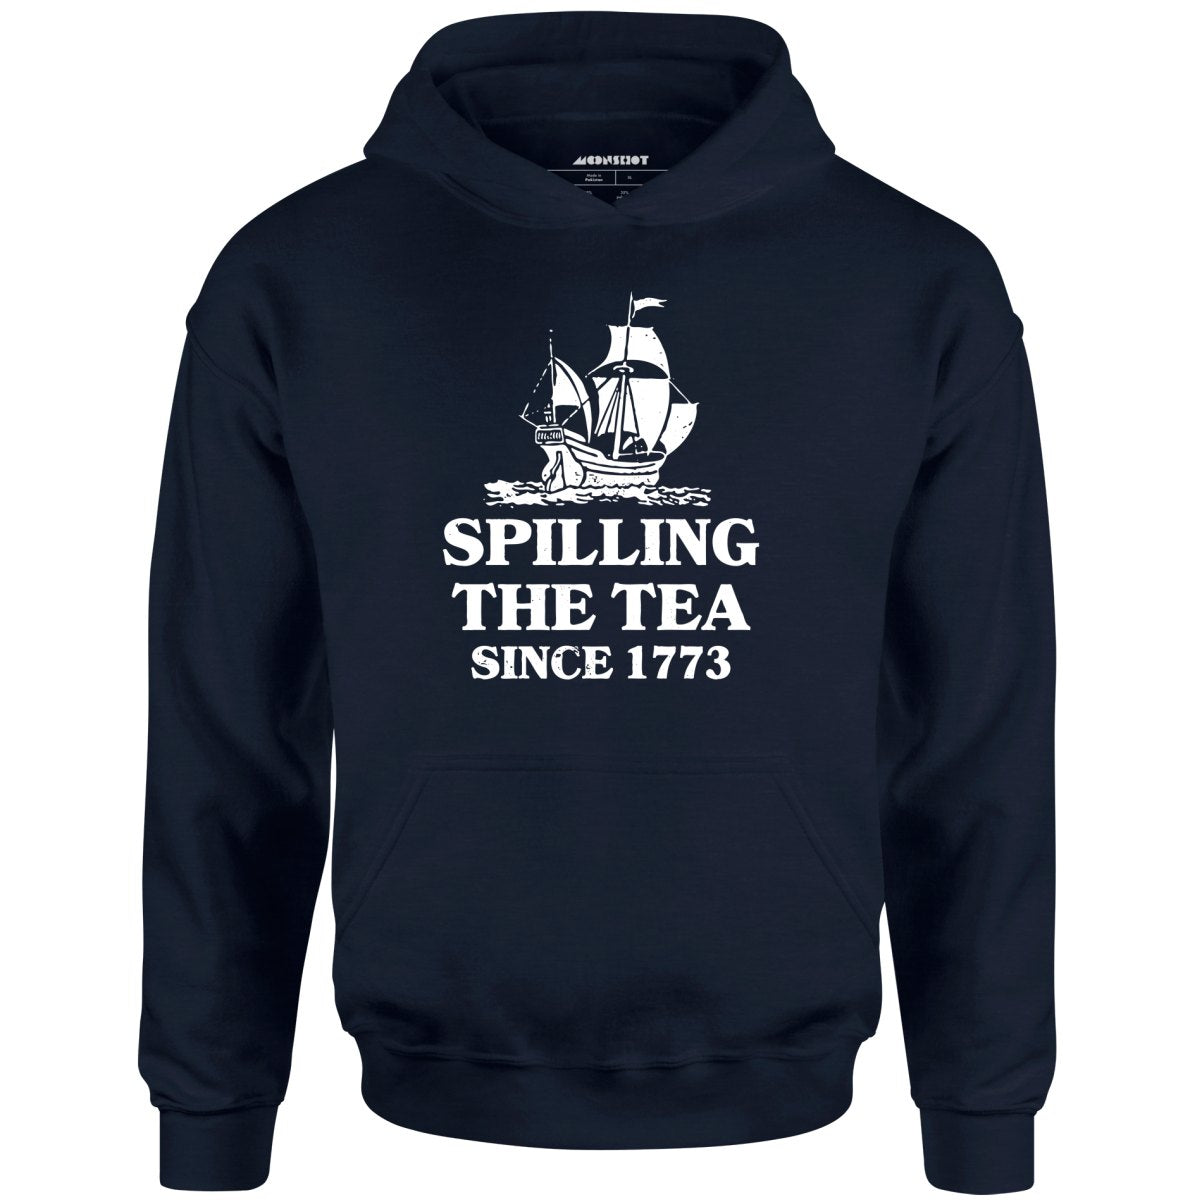 Spilling The Tea Since 1773 - Unisex Hoodie